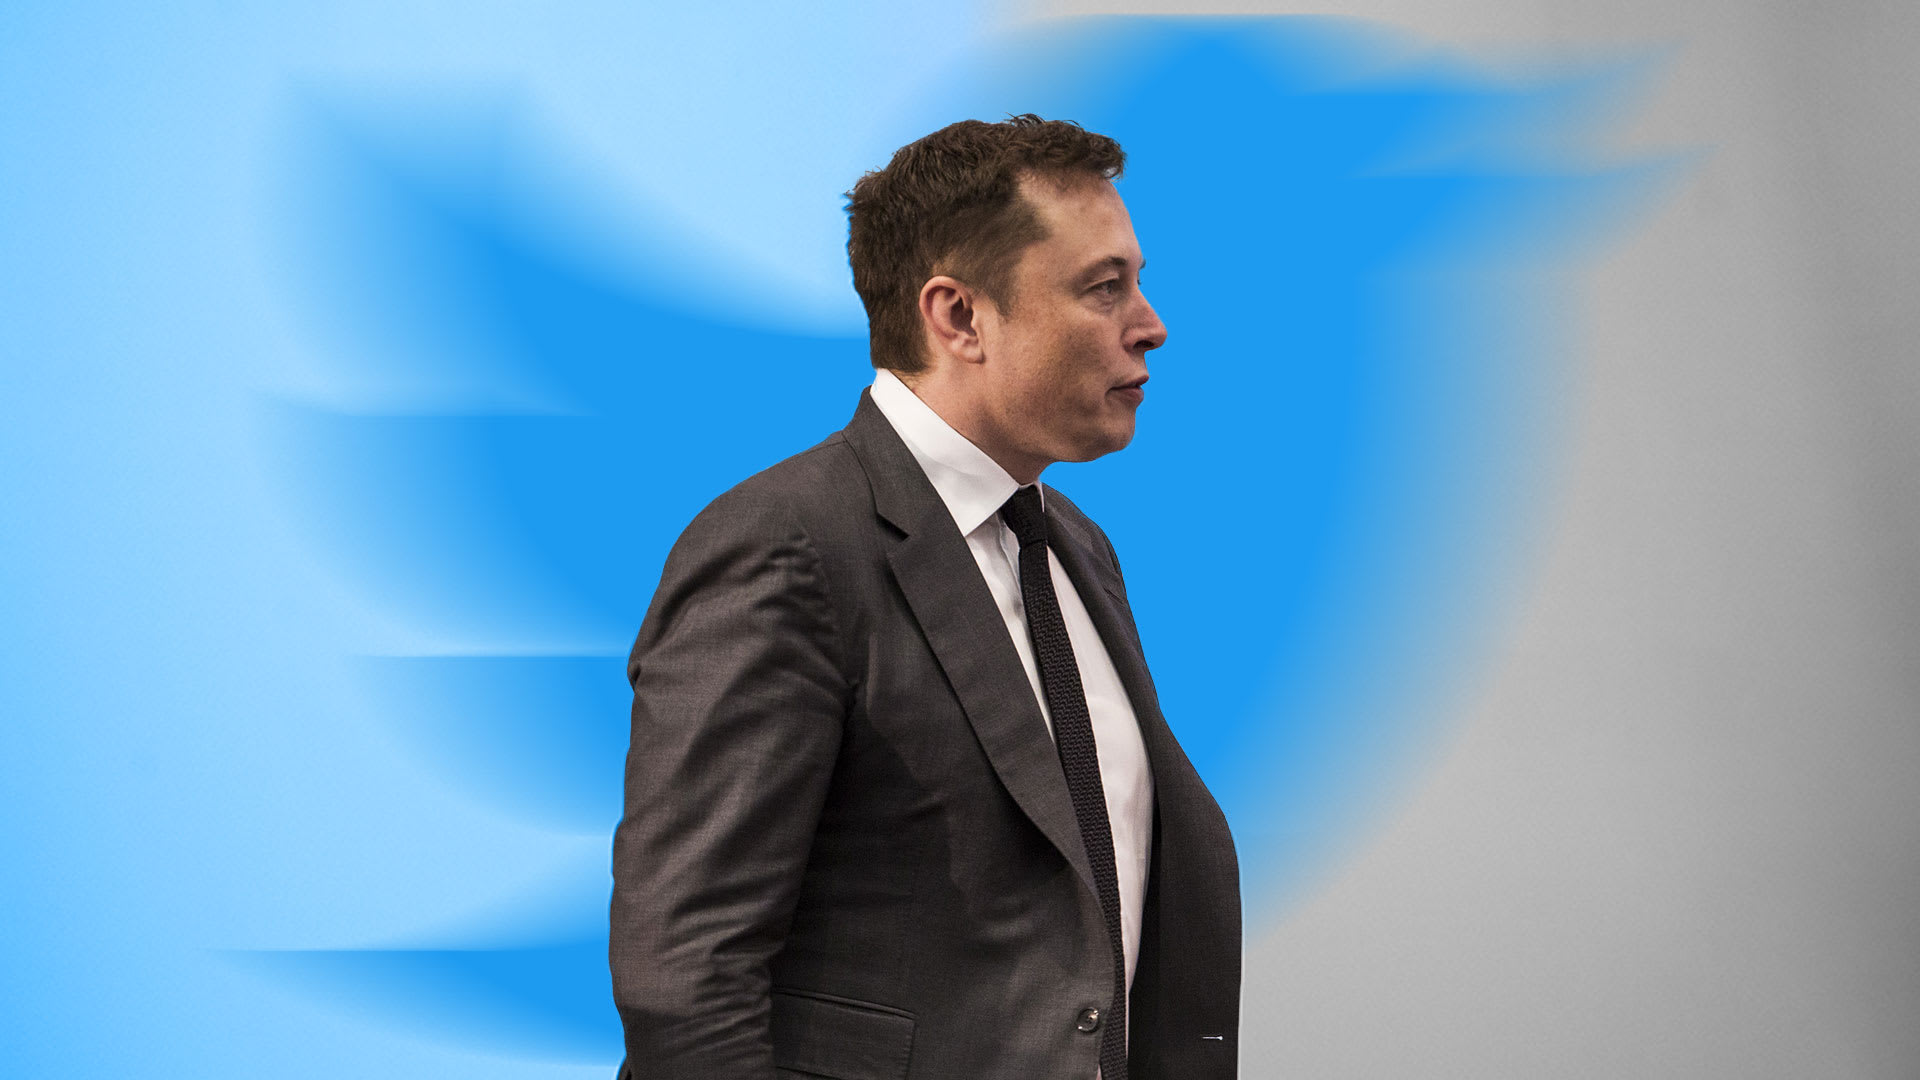 It’s official: Elon Musk doesn’t want to buy Twitter after all